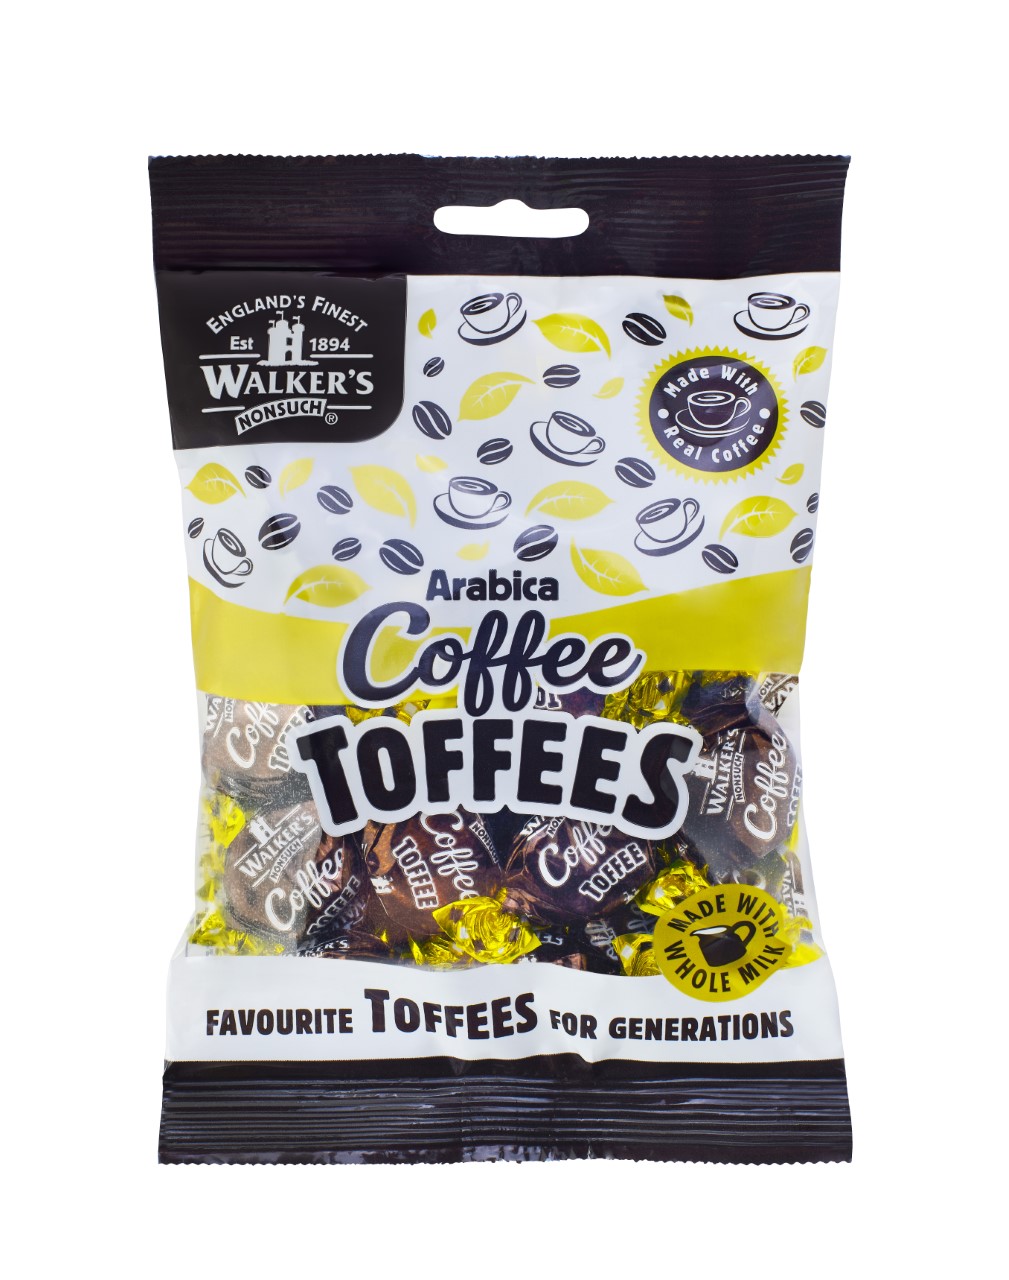 Walker’s Nonsuch introduces new Coffee Toffee